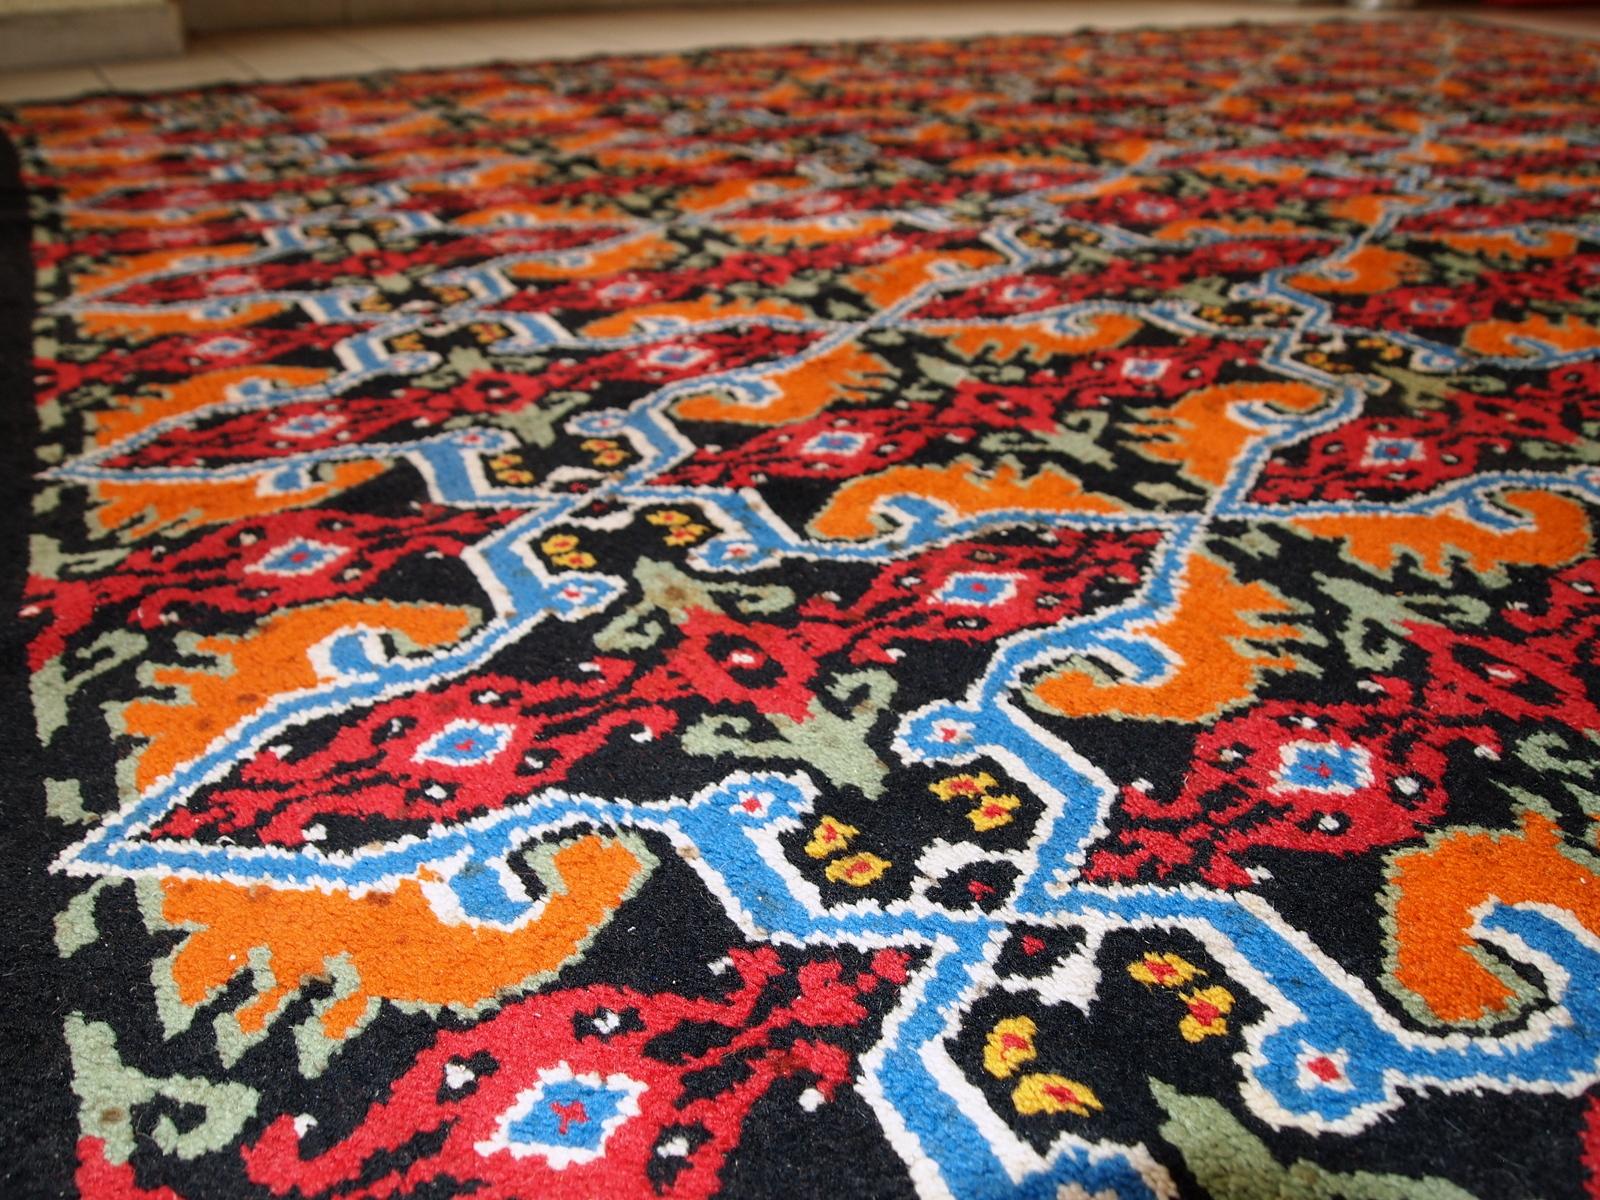 Vintage Moroccan rug in original good condition. The rug has been made in the end of 20th century in geometric design.

-Condition: original good,

-Circa: 1970s,

-Size: 6' x 9.8' (185cm x 300cm),

-Material: wool,

-Country of origin: